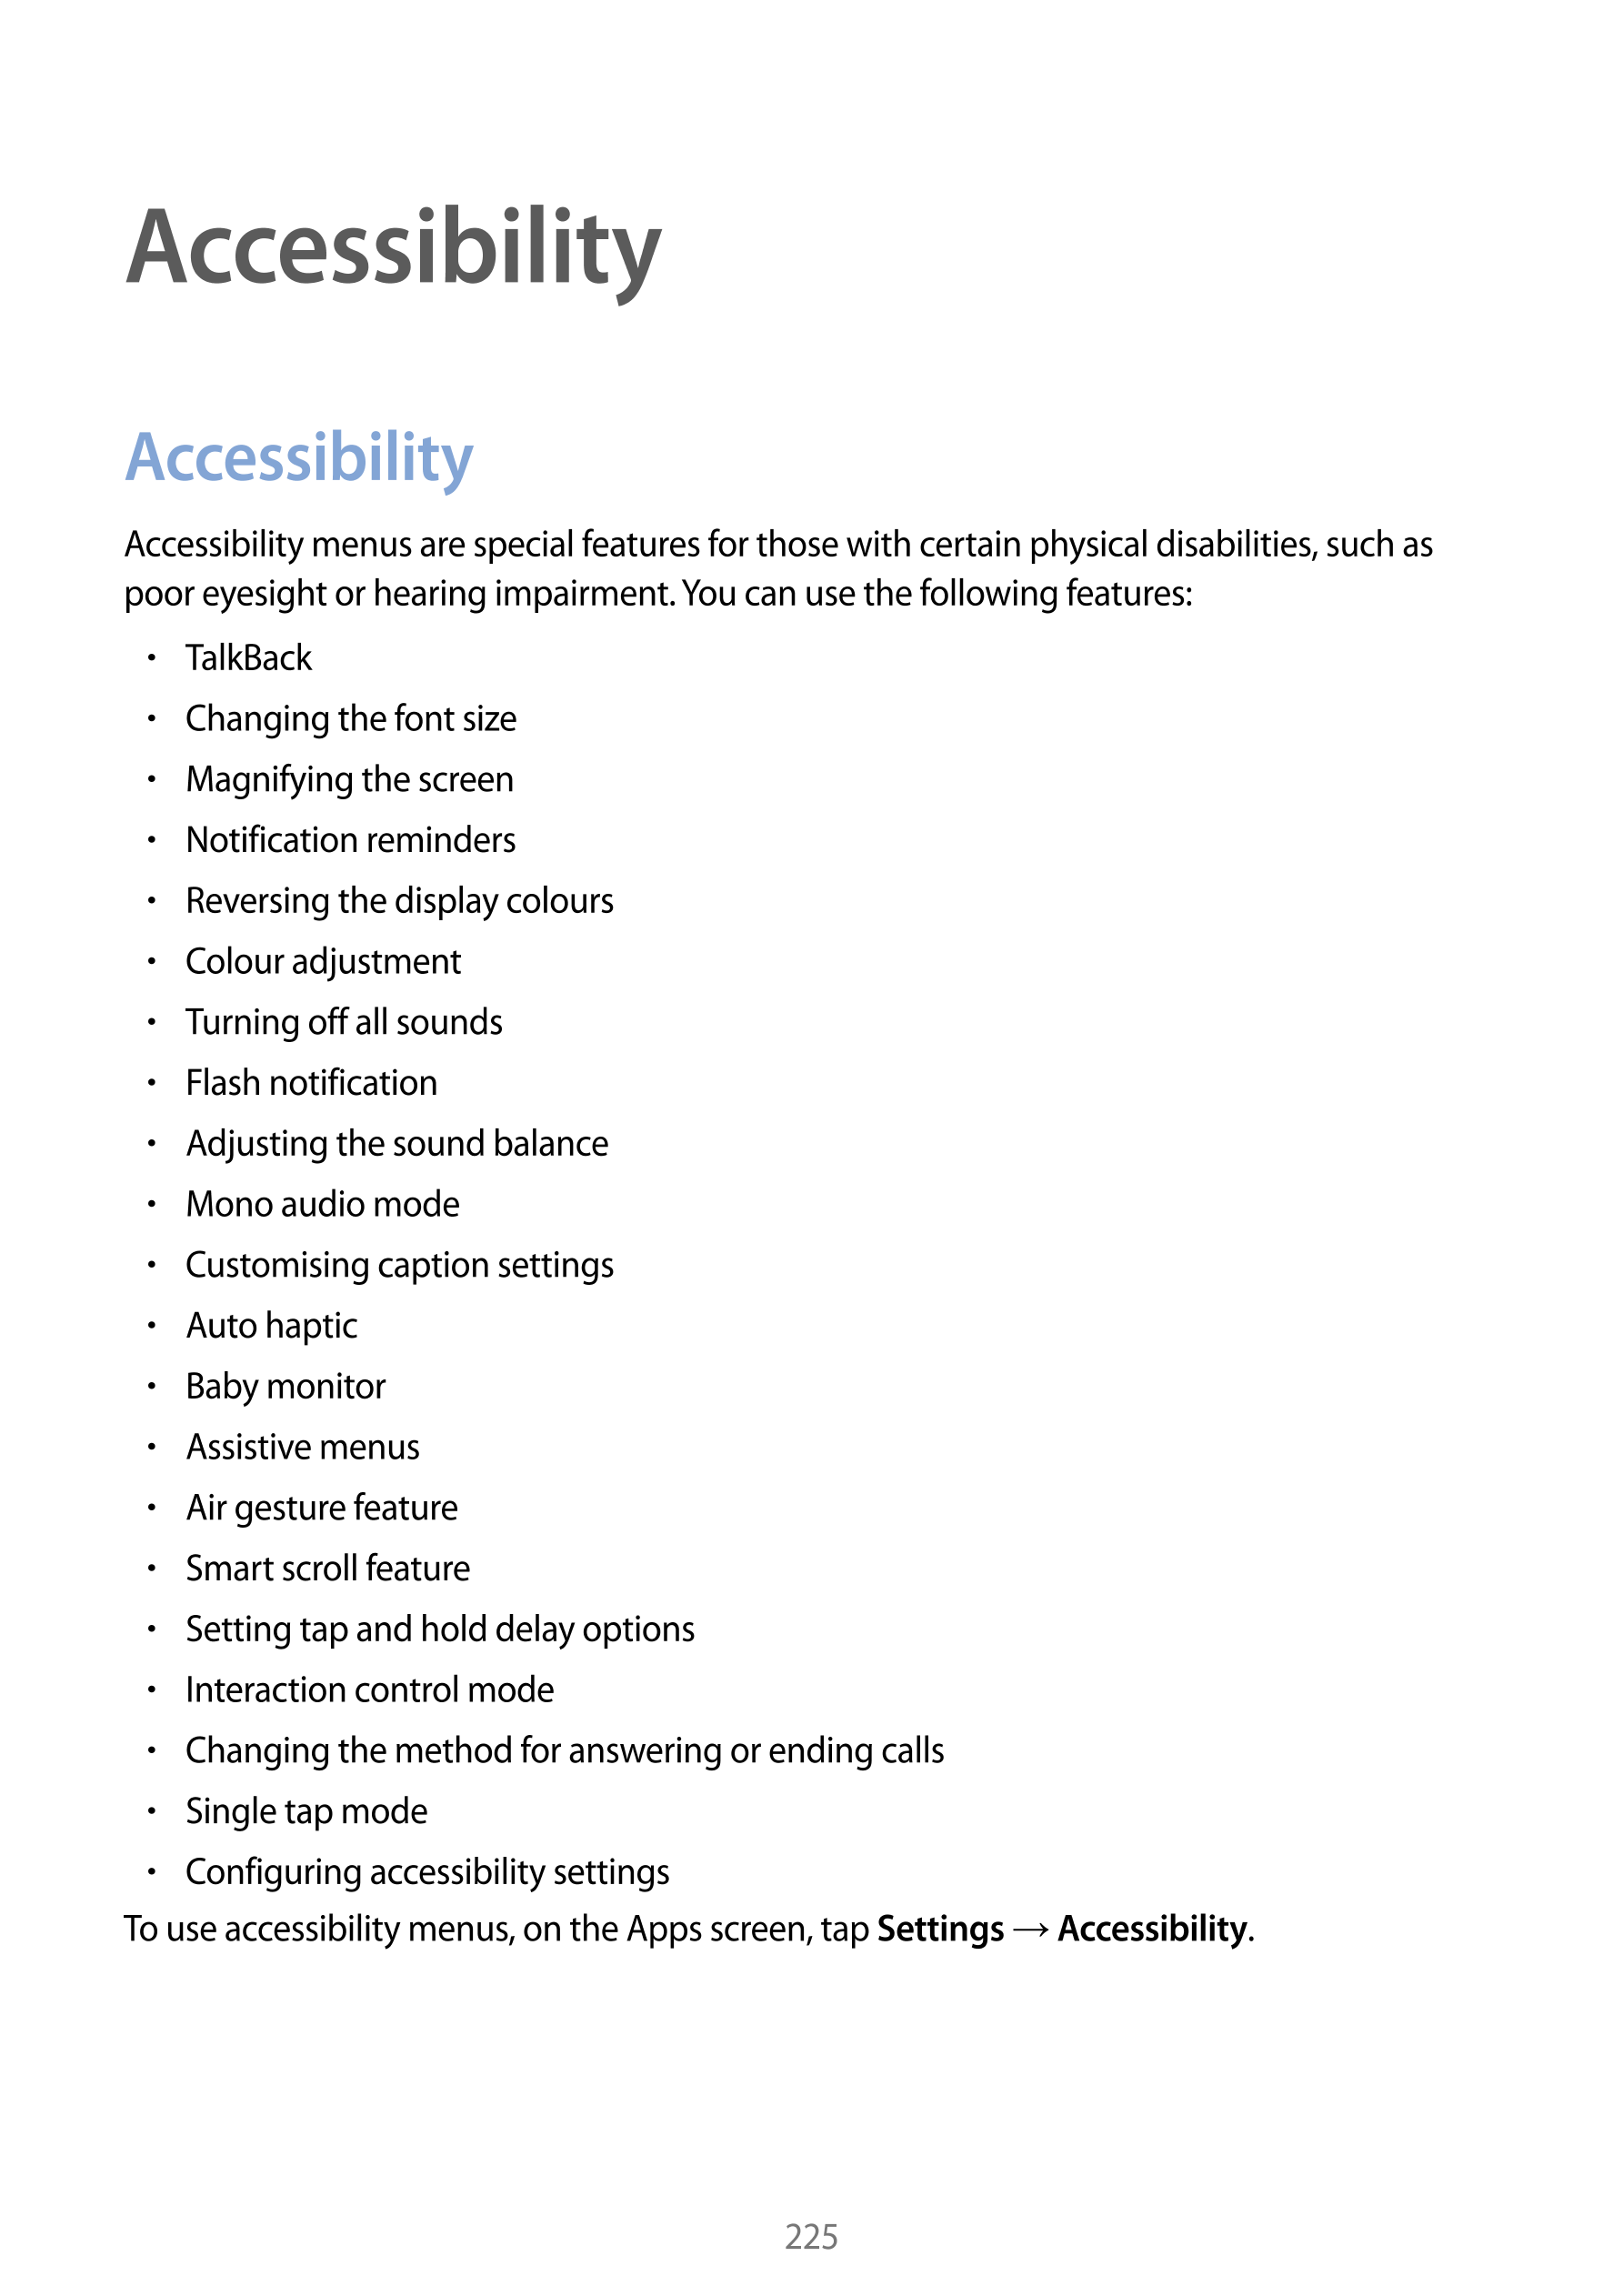 Accessibility
Accessibility
Accessibility menus are special features for those with certain physical disabilities, such as 
poor